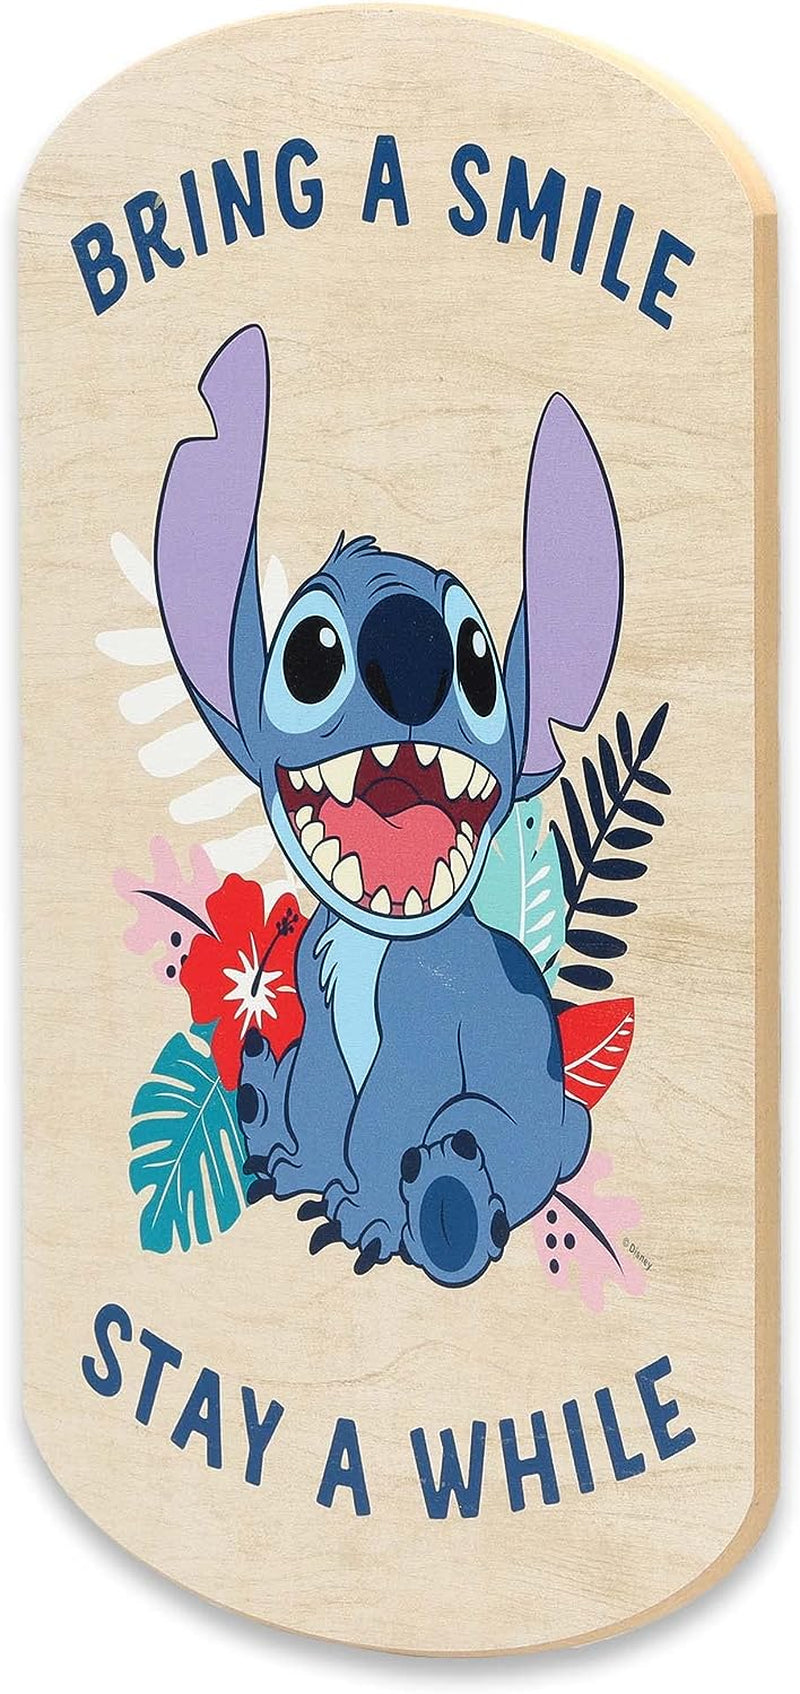 Disney Lilo and Stitch Bring a Smile Stay a While Wood Wall Decor - Fun Stitch Sign for Home Decorating  Open Road Brands   